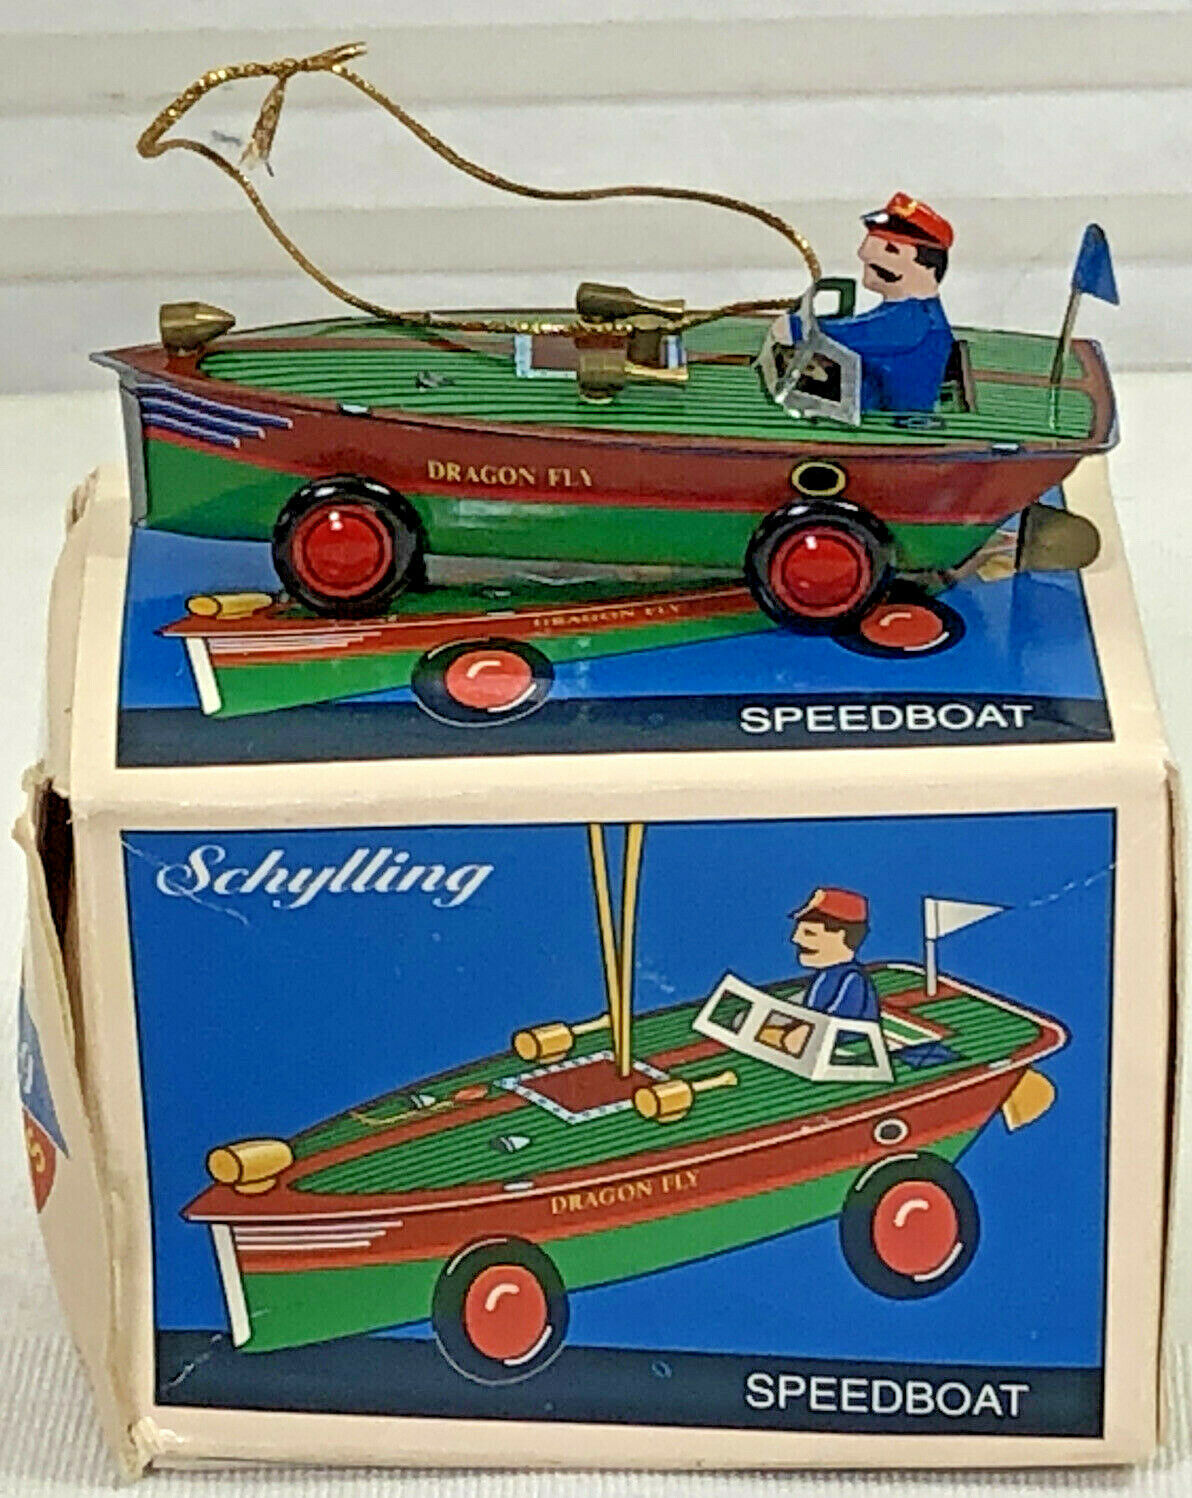 Schylling “Dragon Fly” Tin Speedboat Collector Series - $34.53